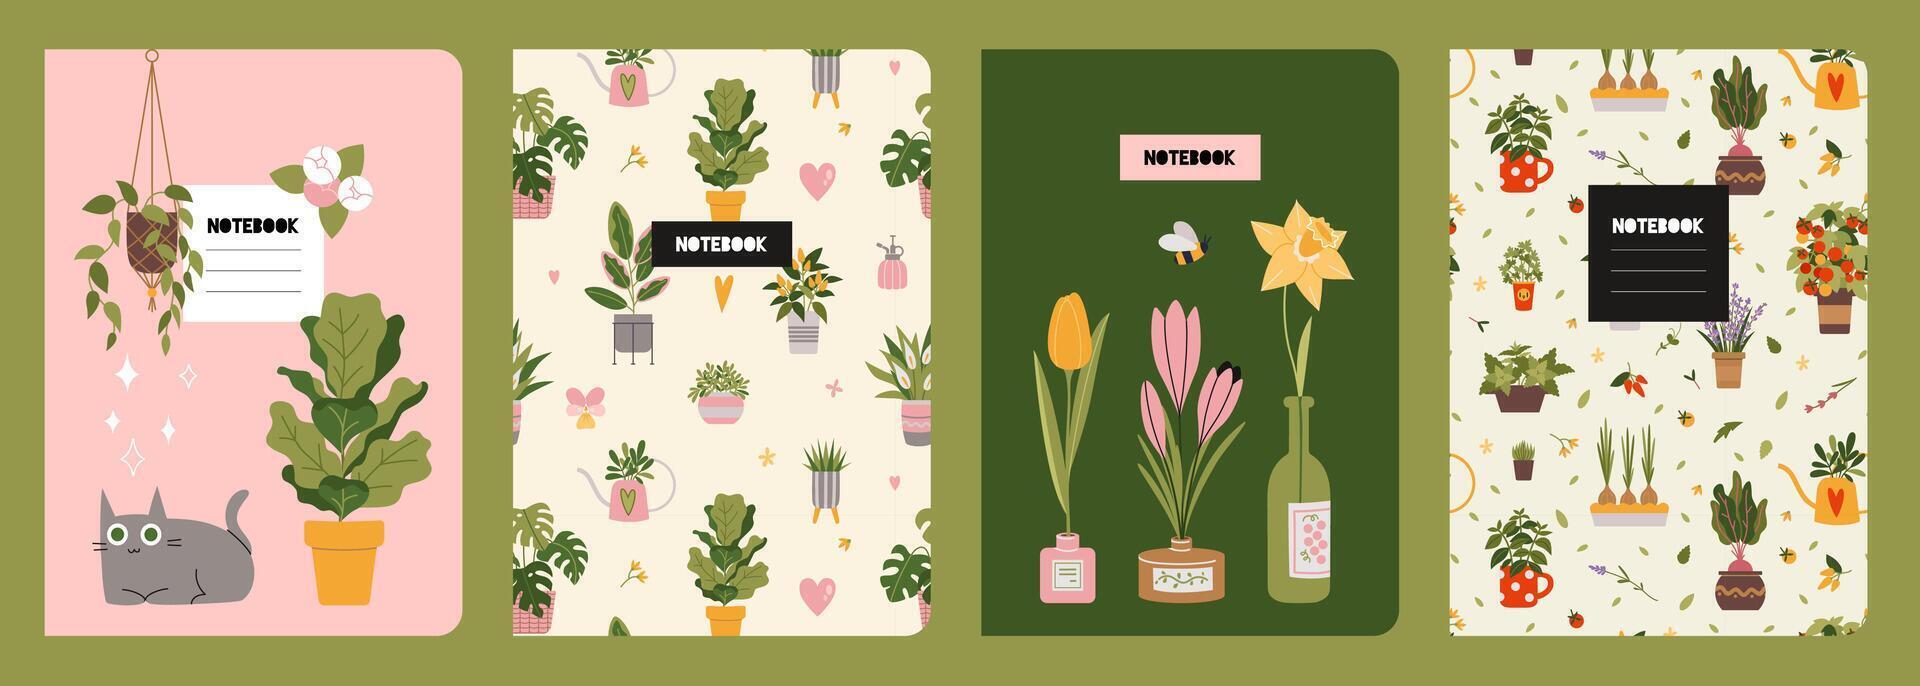 Trendy covers set on a plants theme, cartoon style illustration. Cool design with floral seamless patterns and cute cozy home objects. For notebooks, planners, brochures, books and catalogs vector